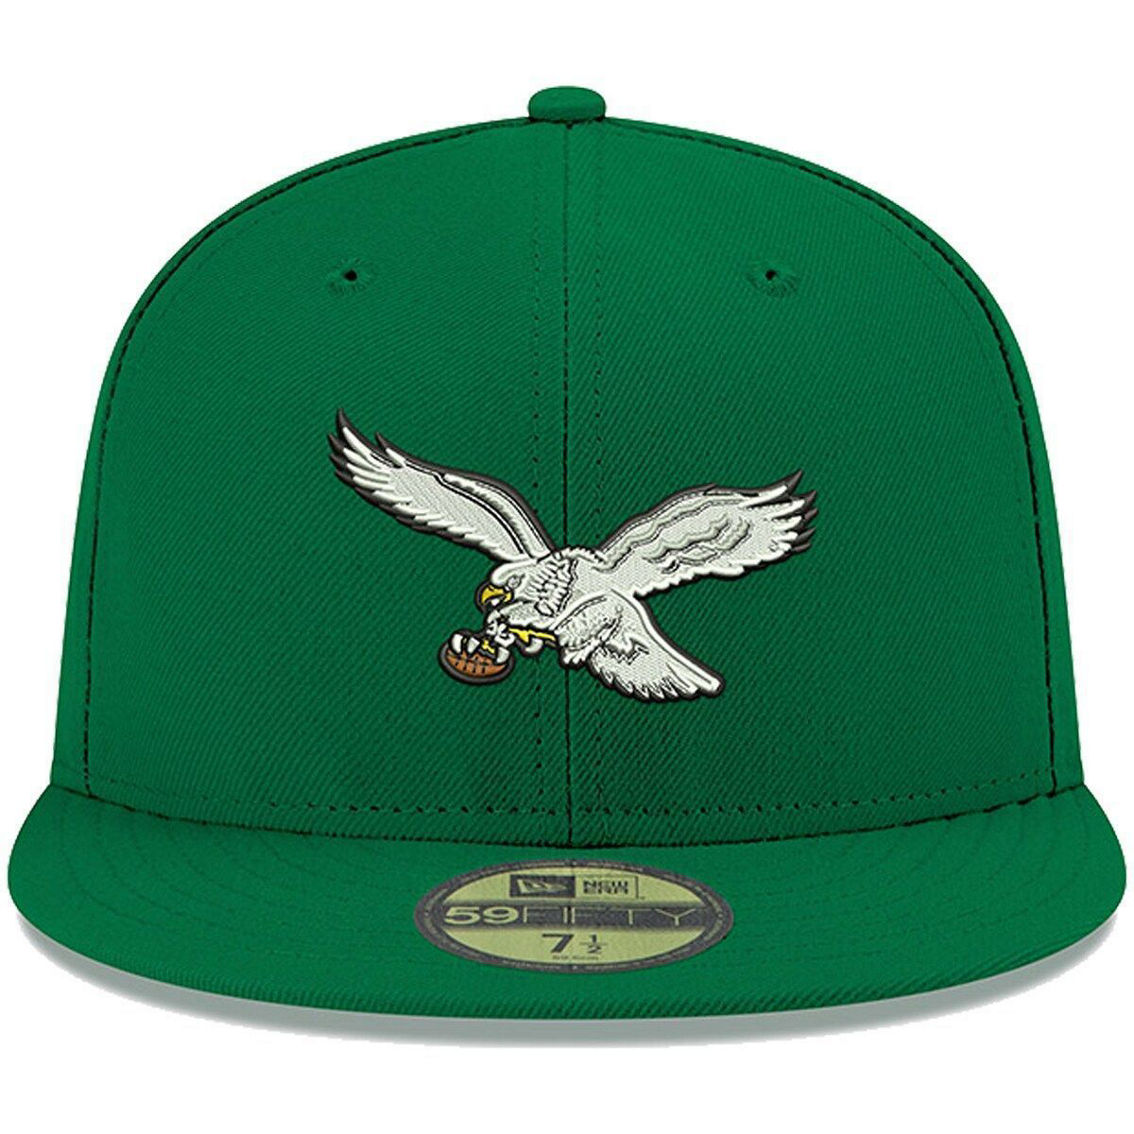 New Era Men's Kelly Green Philadelphia Eagles Omaha Throwback 59FIFTY Fitted Hat - Image 3 of 4